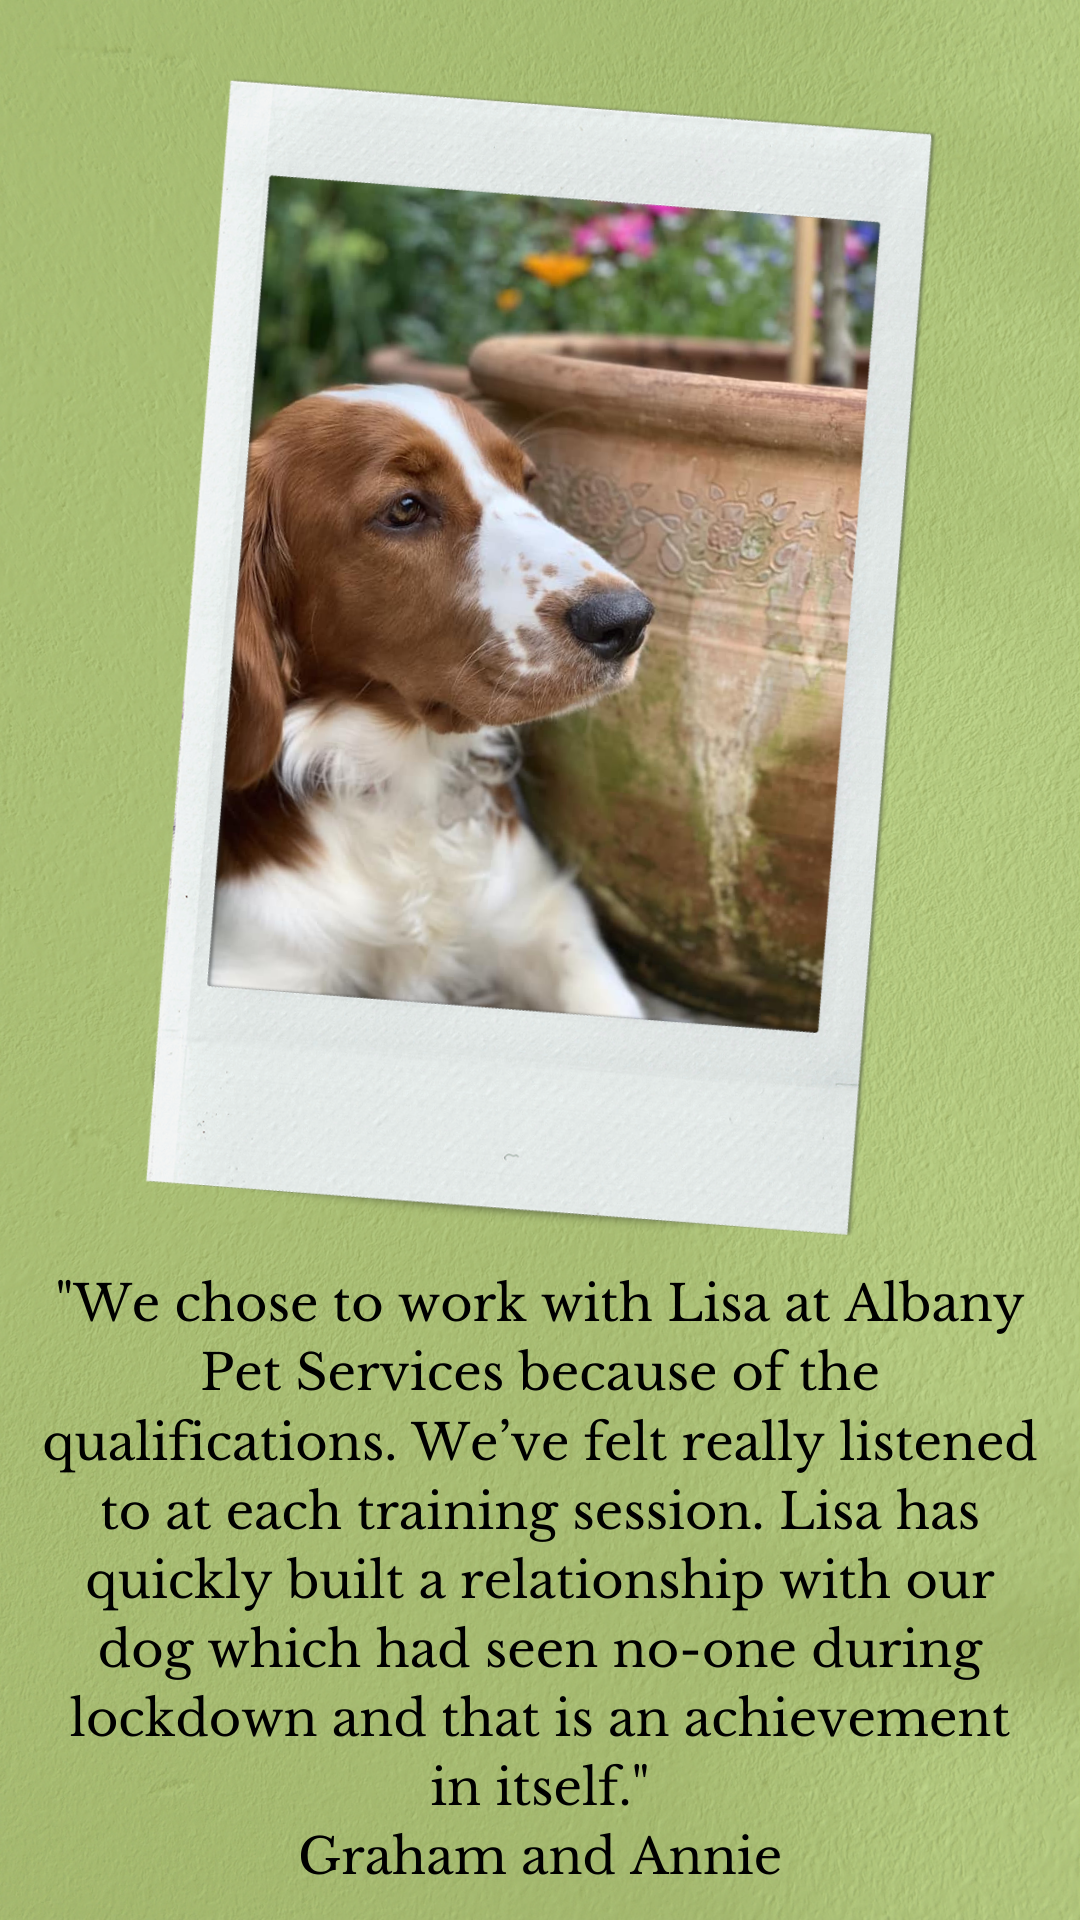 "We chose to work with Lisa at Albany Pet Services because of the qualifications. We’ve felt really listened to at each training session. Lisa has quickly built a relationship with our dog which had seen no-one during lockdown and that is an achievement in itself." Graham and Annie